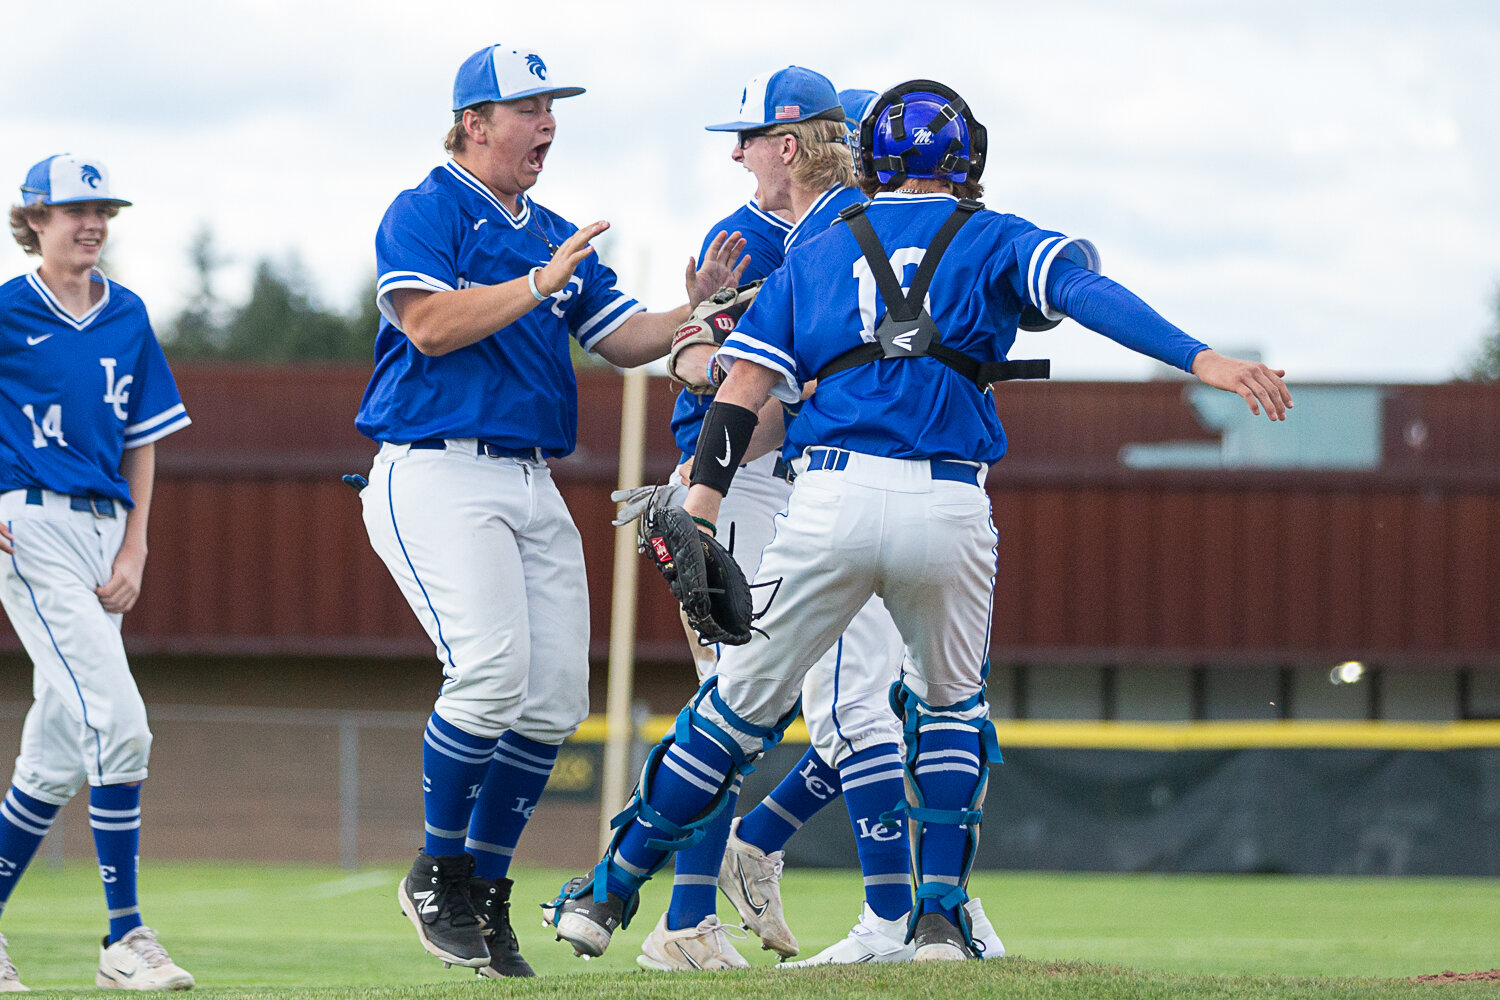 The La Center baseball team rushes to celebrate on the mound after a 5-4 win over Tenino in the 1A District 4 semifinals at Castle Rock May 9.